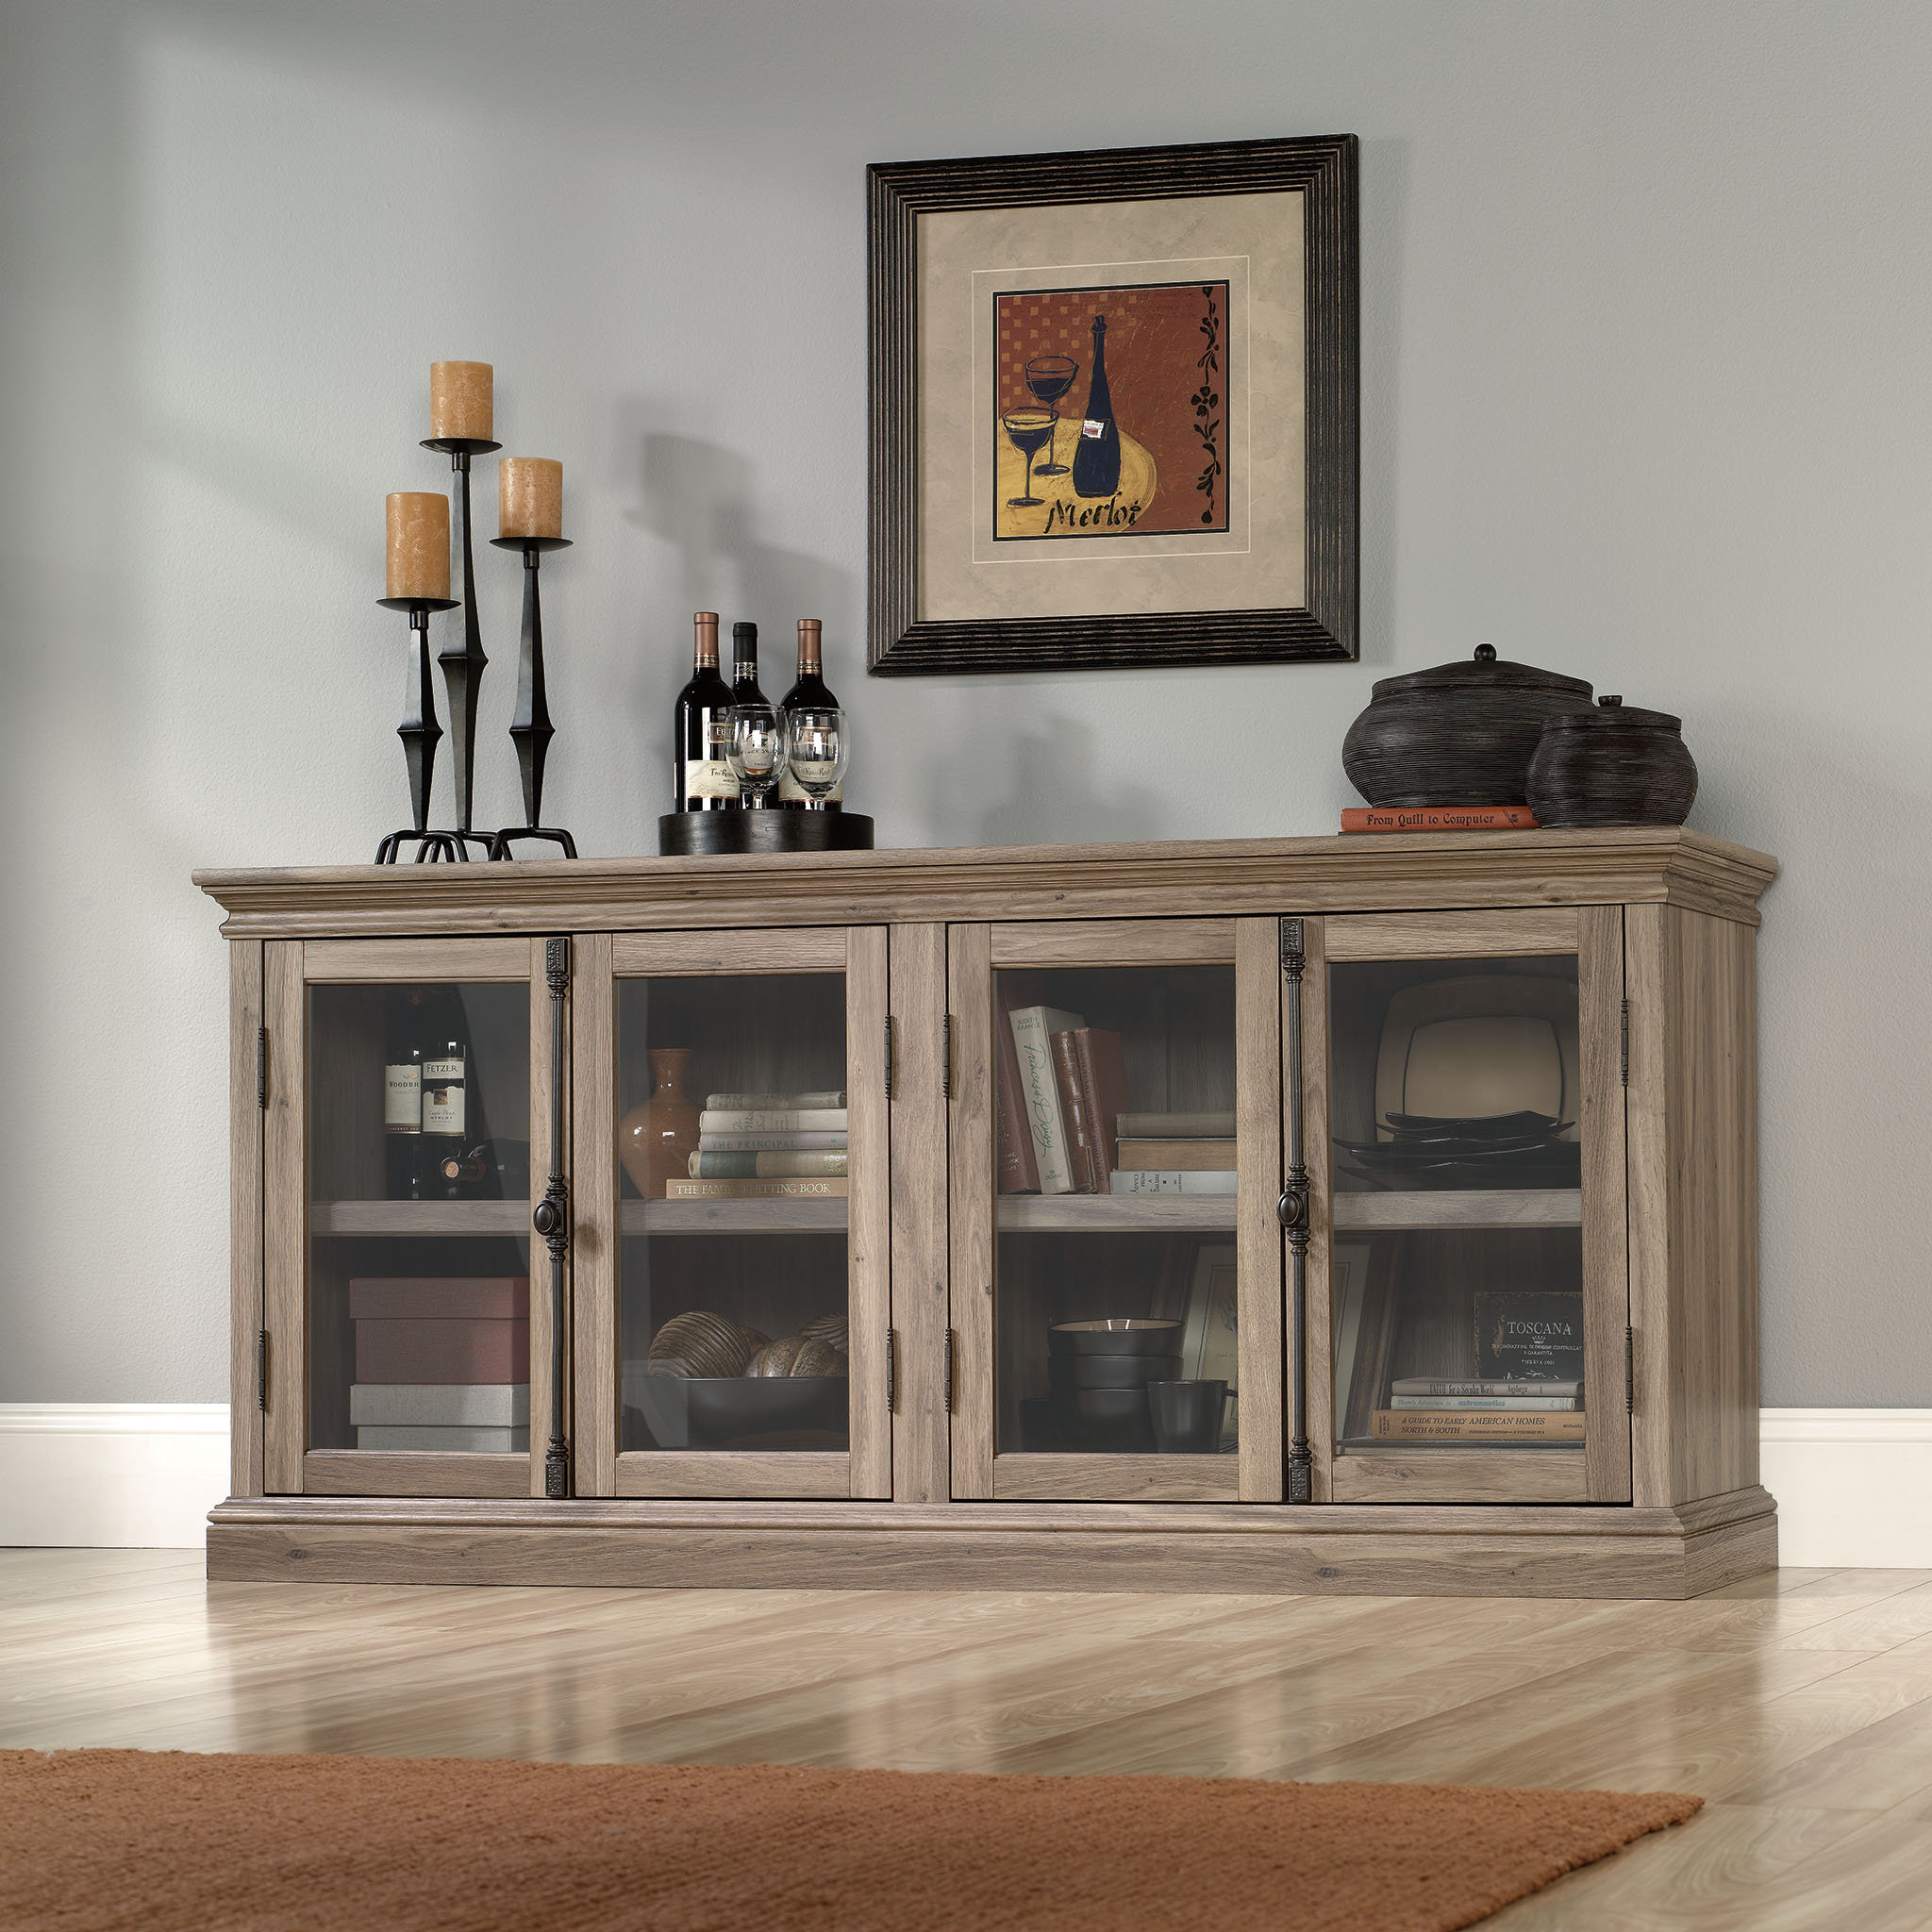 Darby Home Co Rhoades TV Stand & Reviews | Wayfair